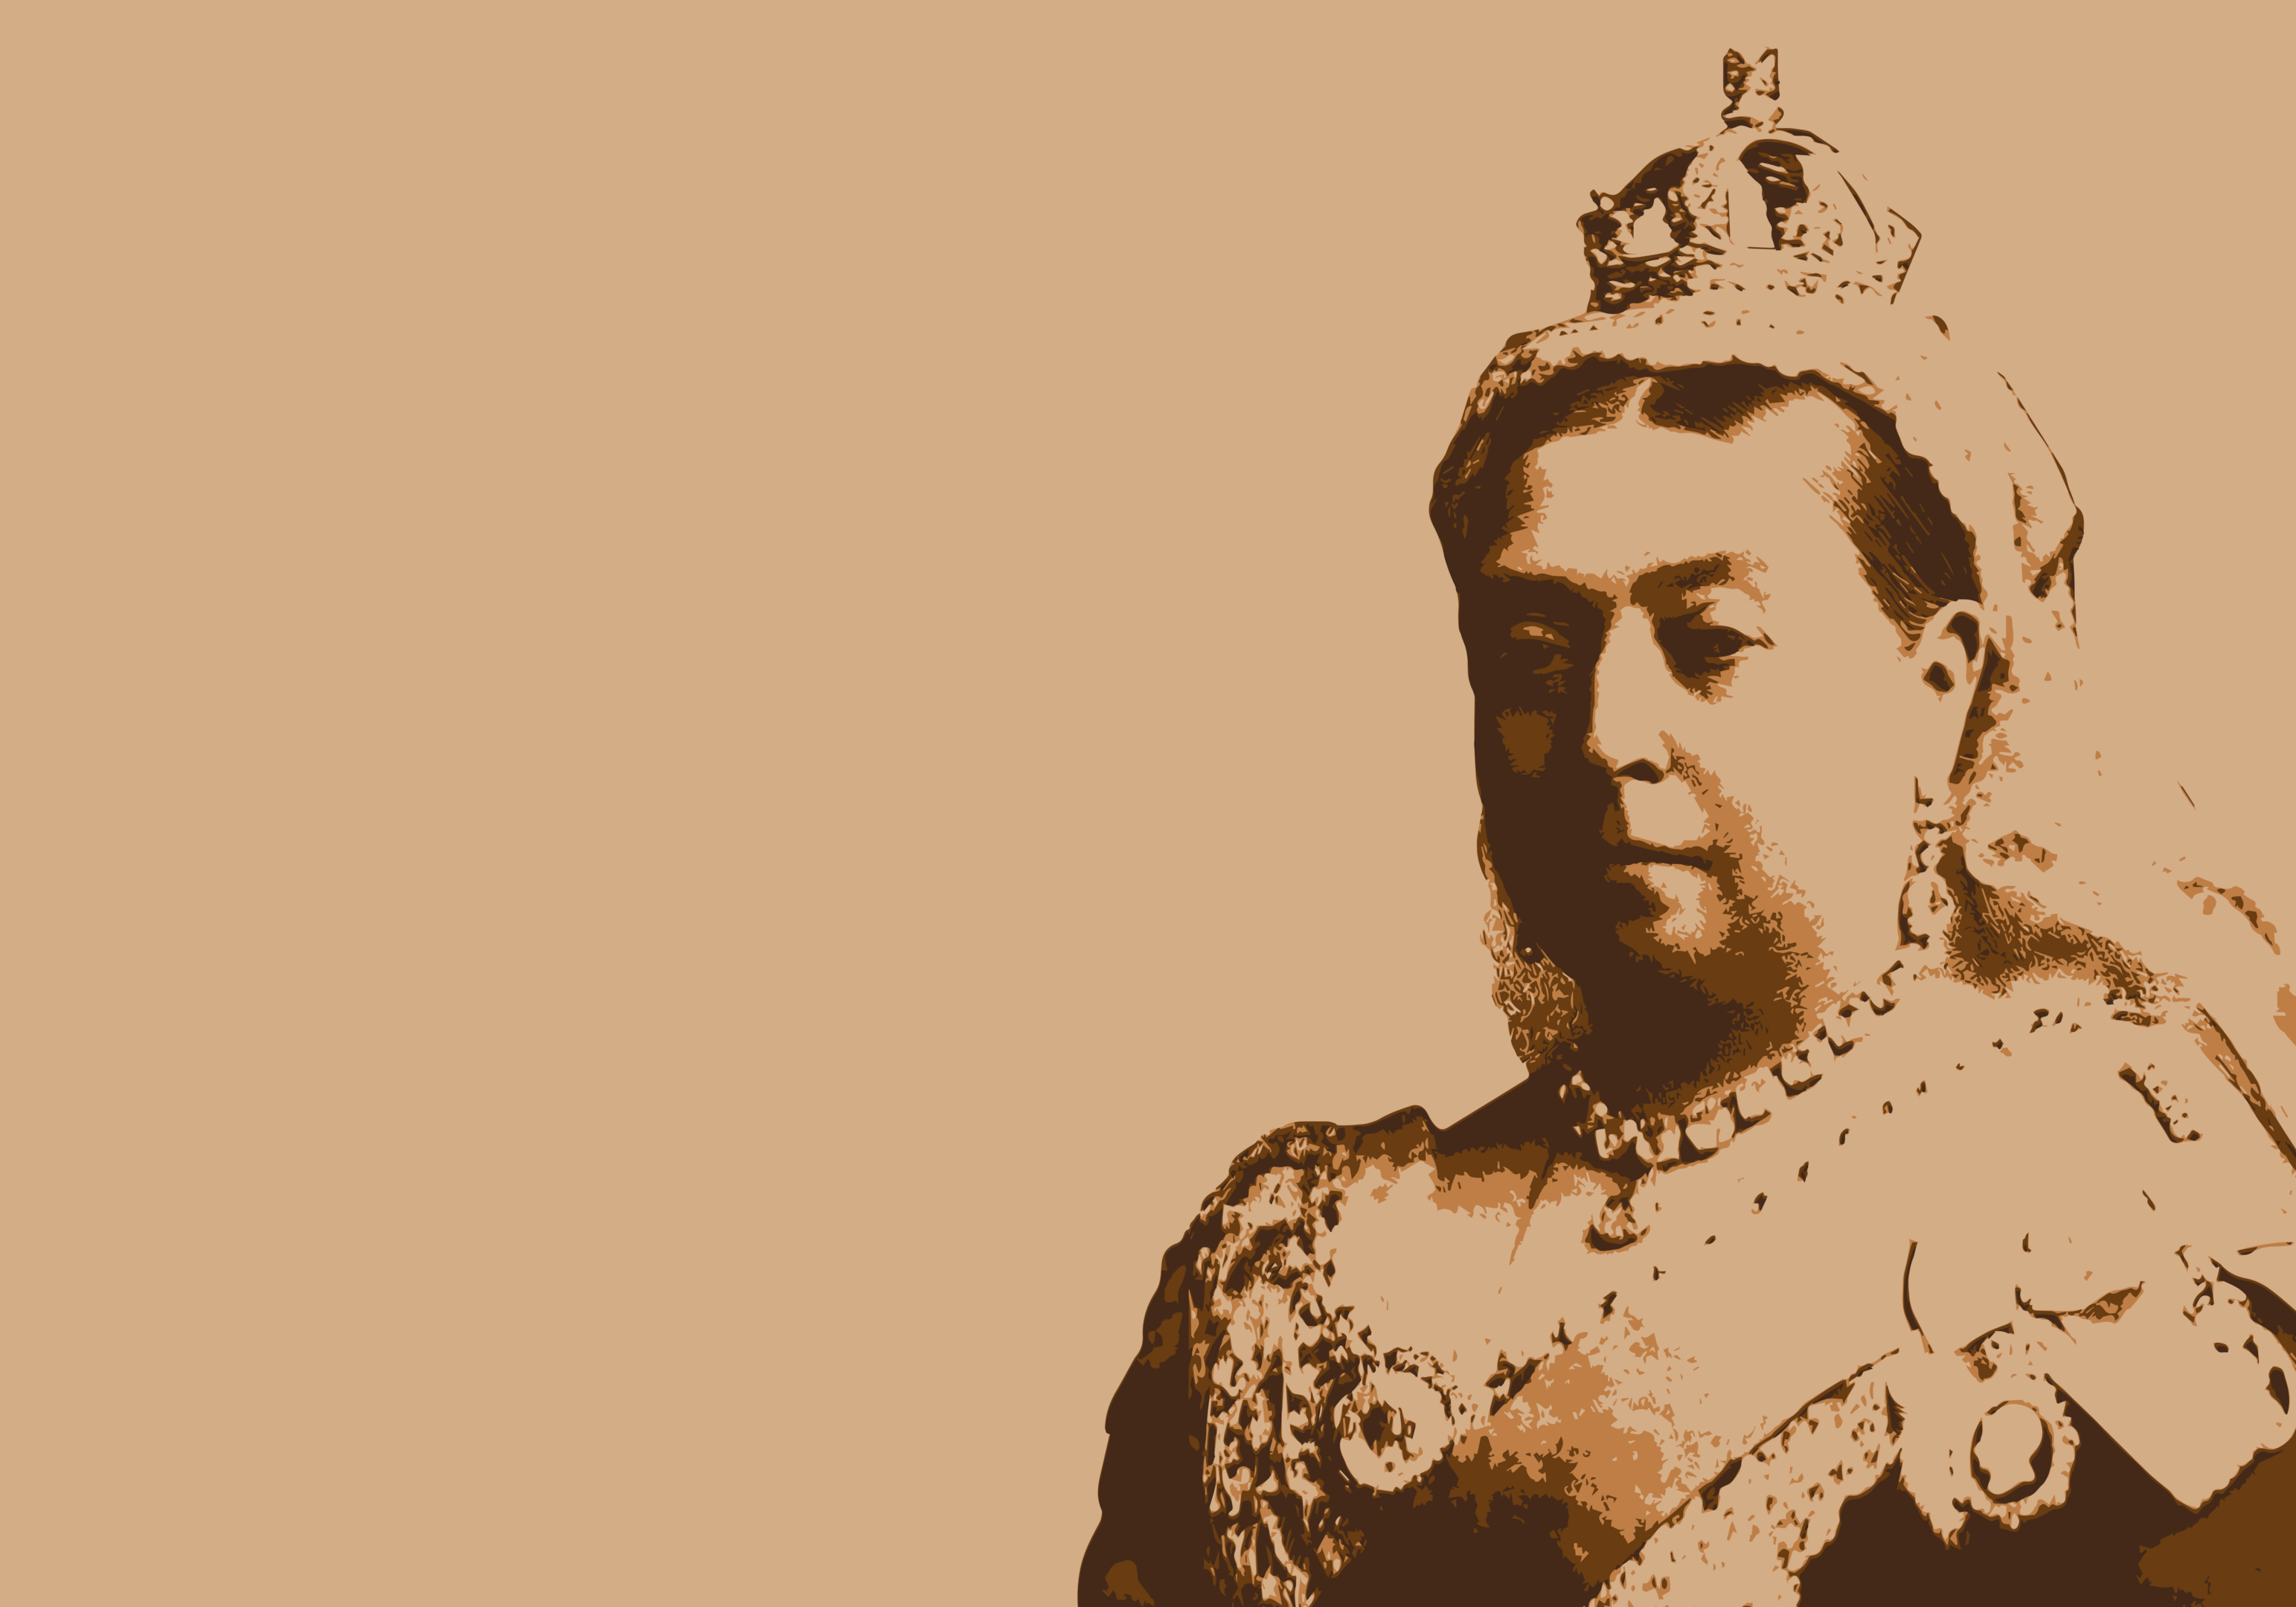 Queen Victoria, a woman with some serious weight to her name, had a doctor who had possession of marijuana and would prescribe it to help the queen with her menstrual cramps. 